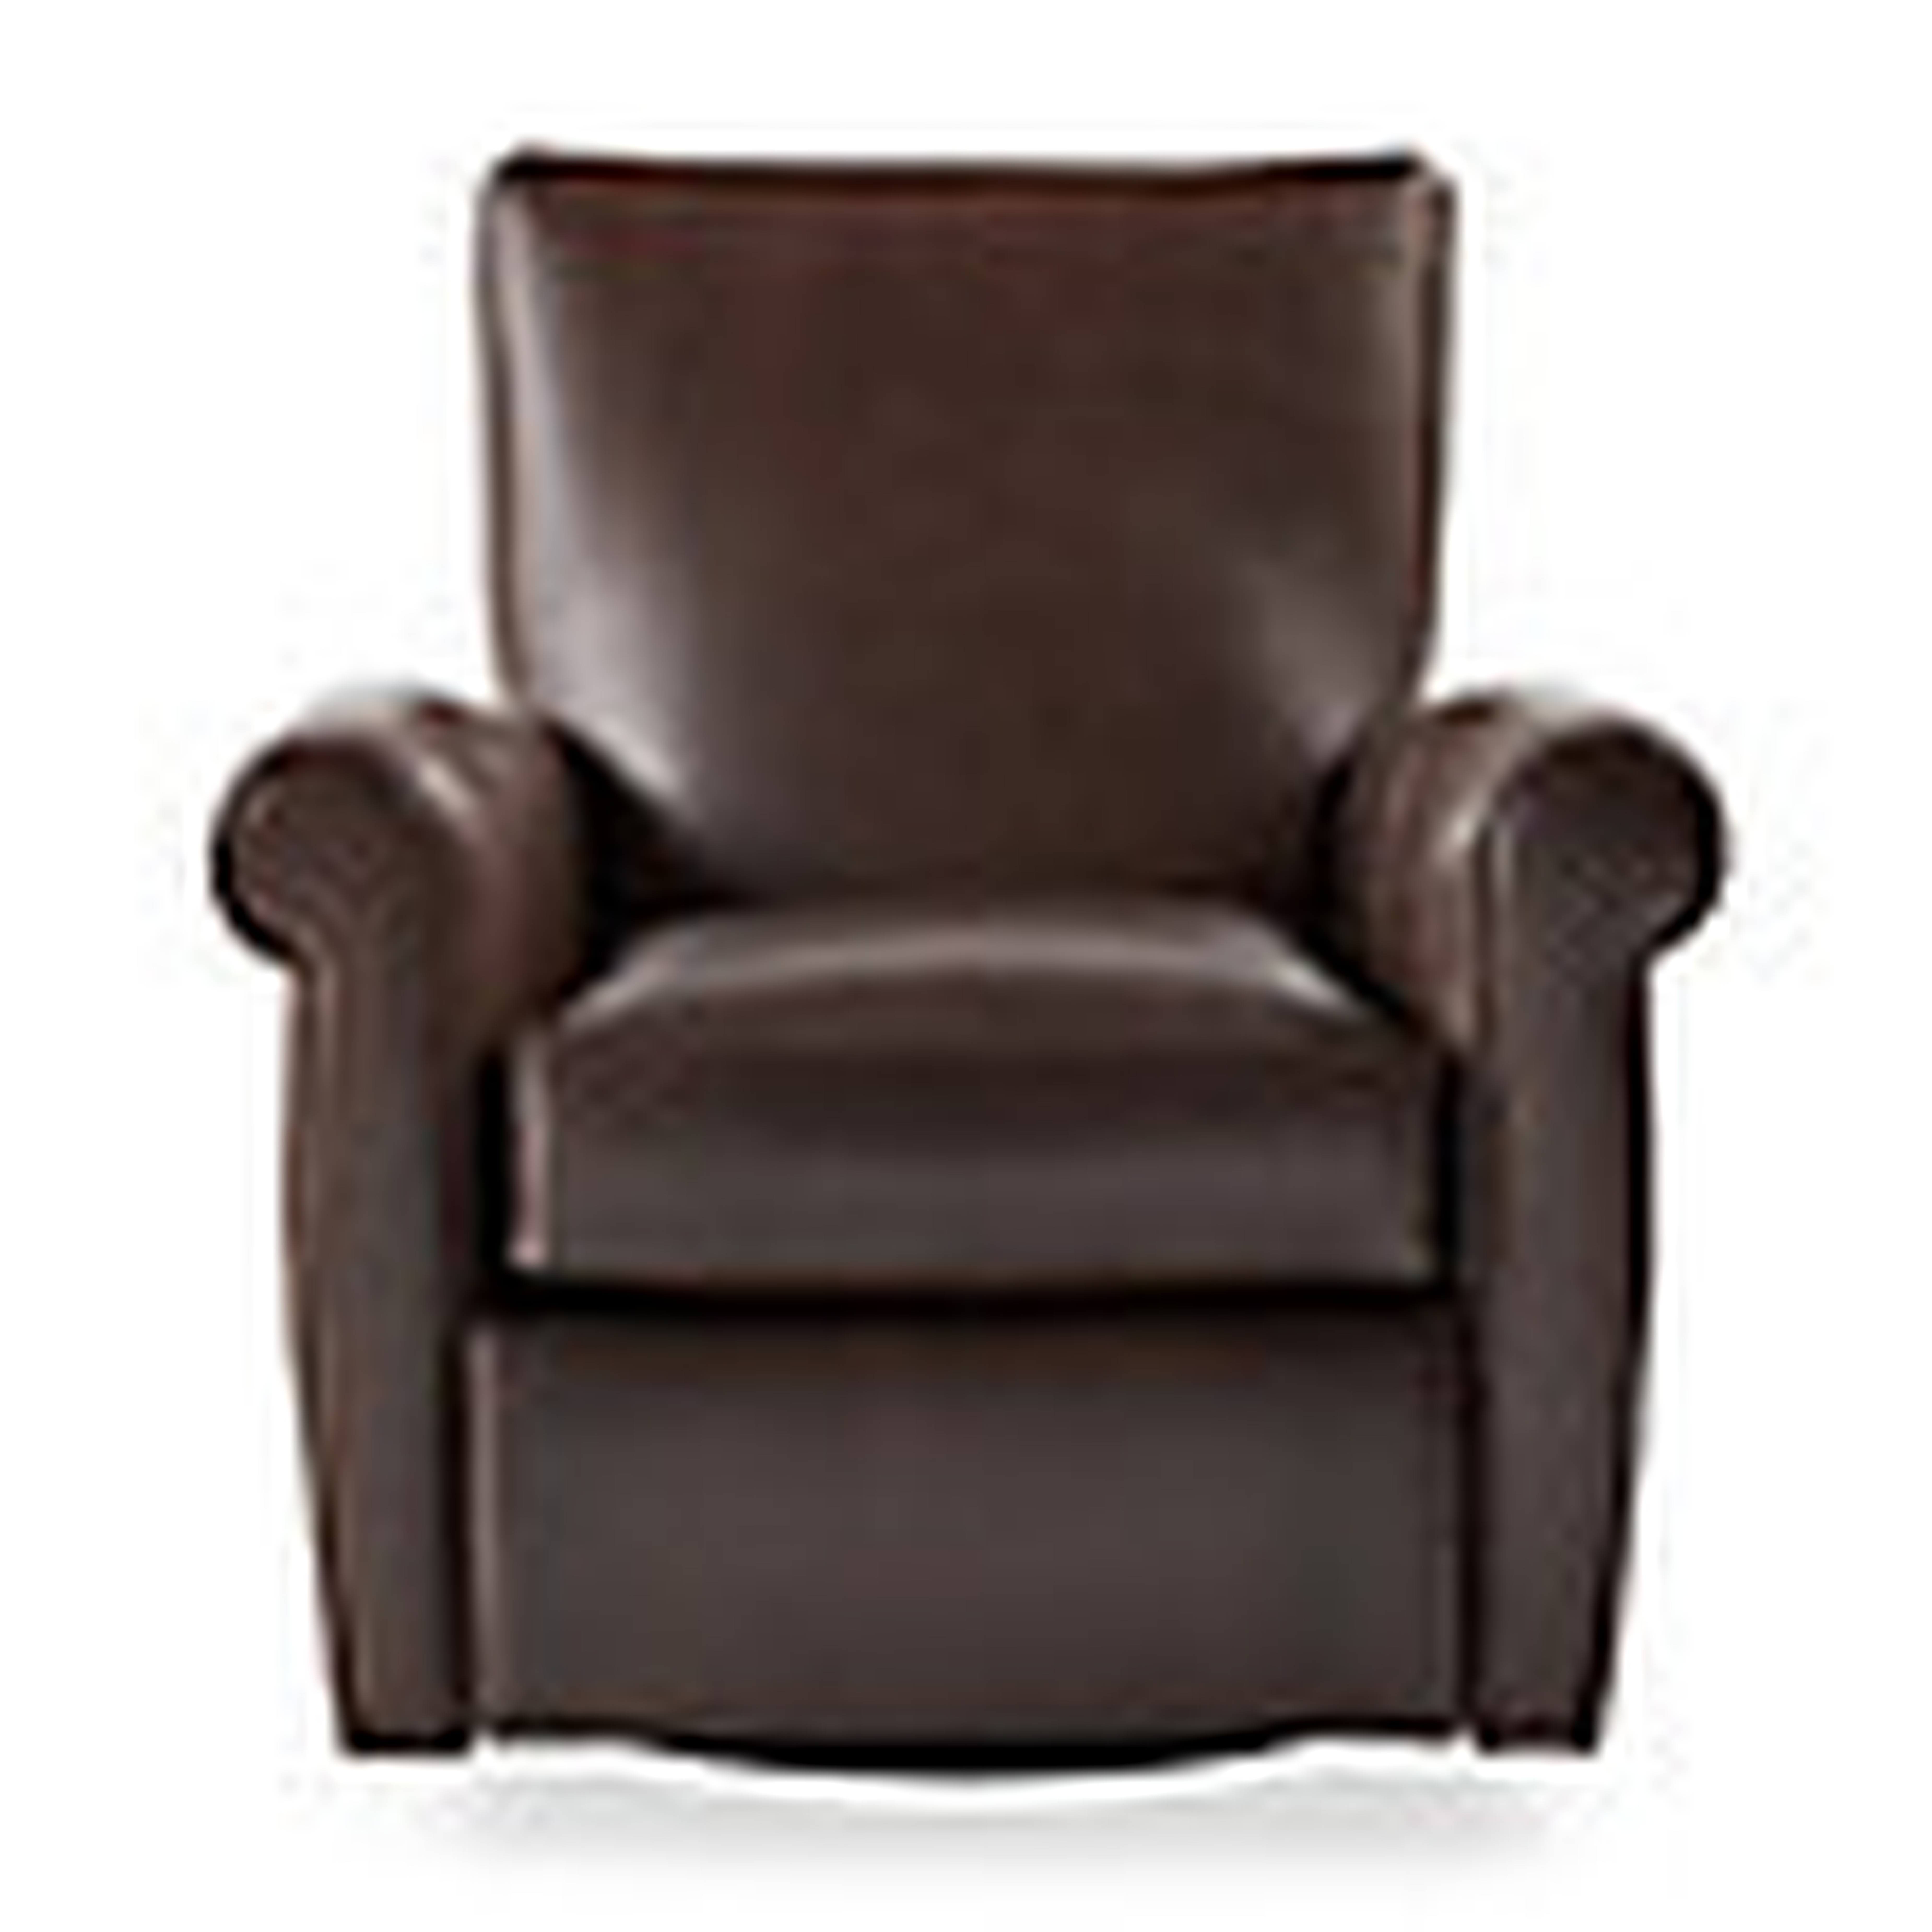 DUVALL 35" LEATHER SWIVEL RECLINER IN LEAR CHOCOLATE - Arhaus